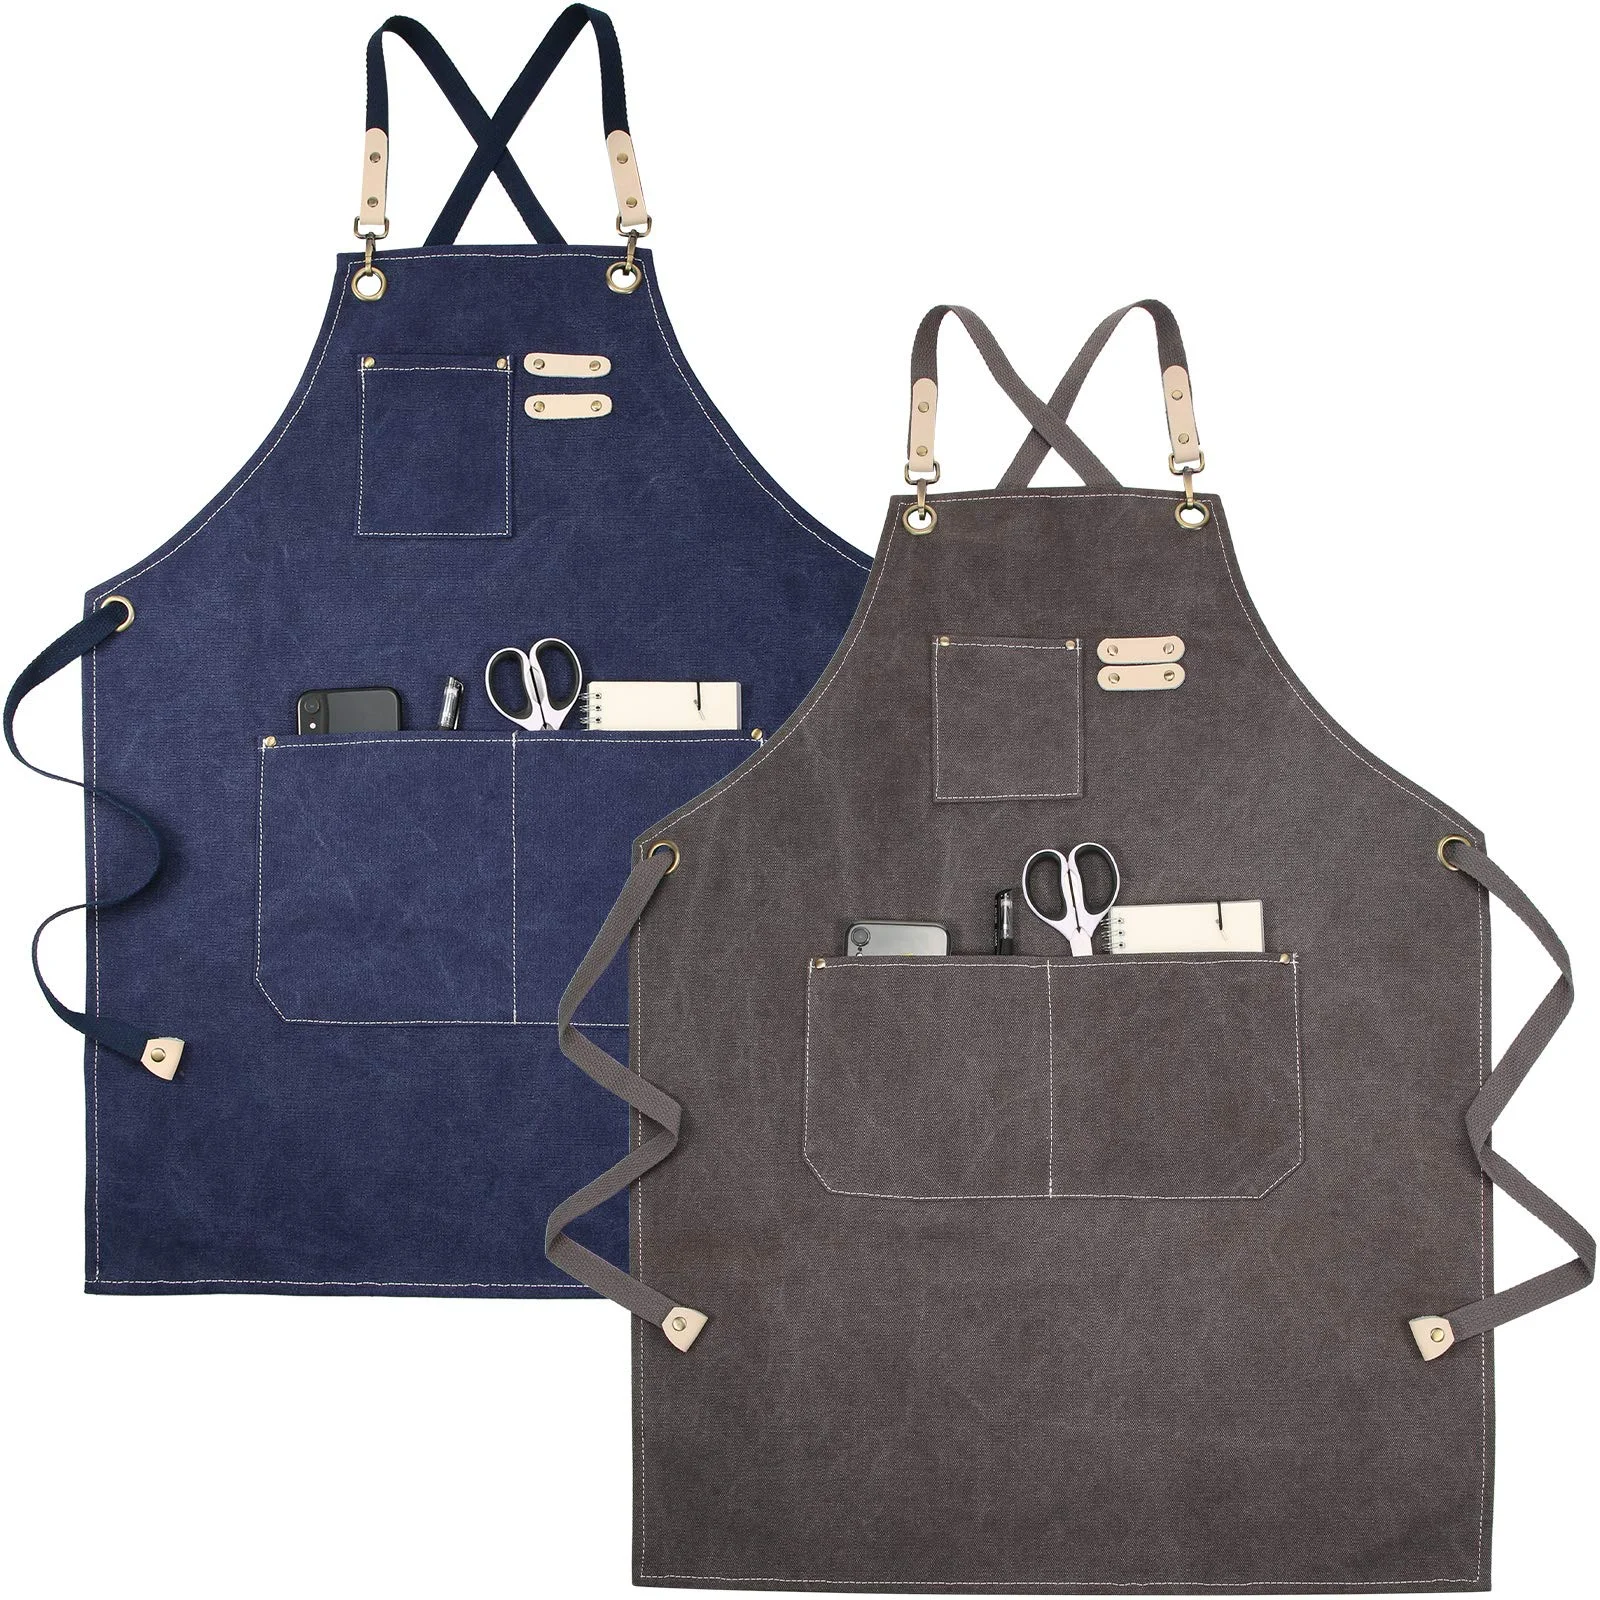 

Baking BBQ Painting Cotton Canvas Adjustable Apron w for Women Men Grilling Hair Stylist Crafting, Beige, black, etc. or custom